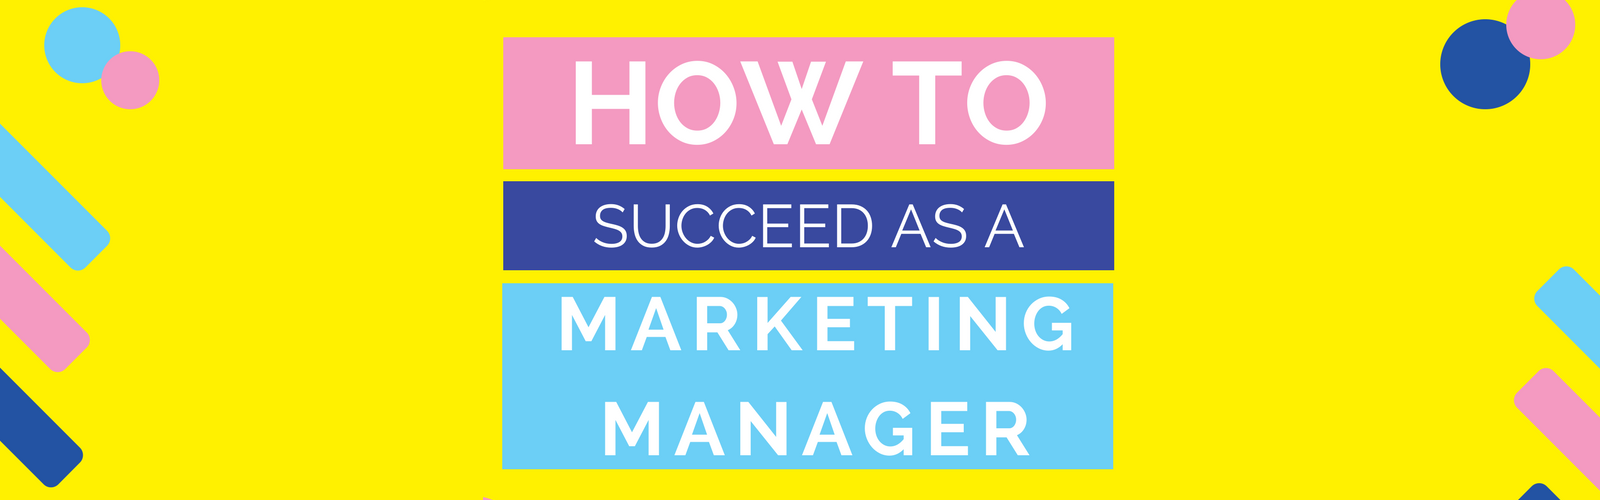 how to succeed as a marketing manager